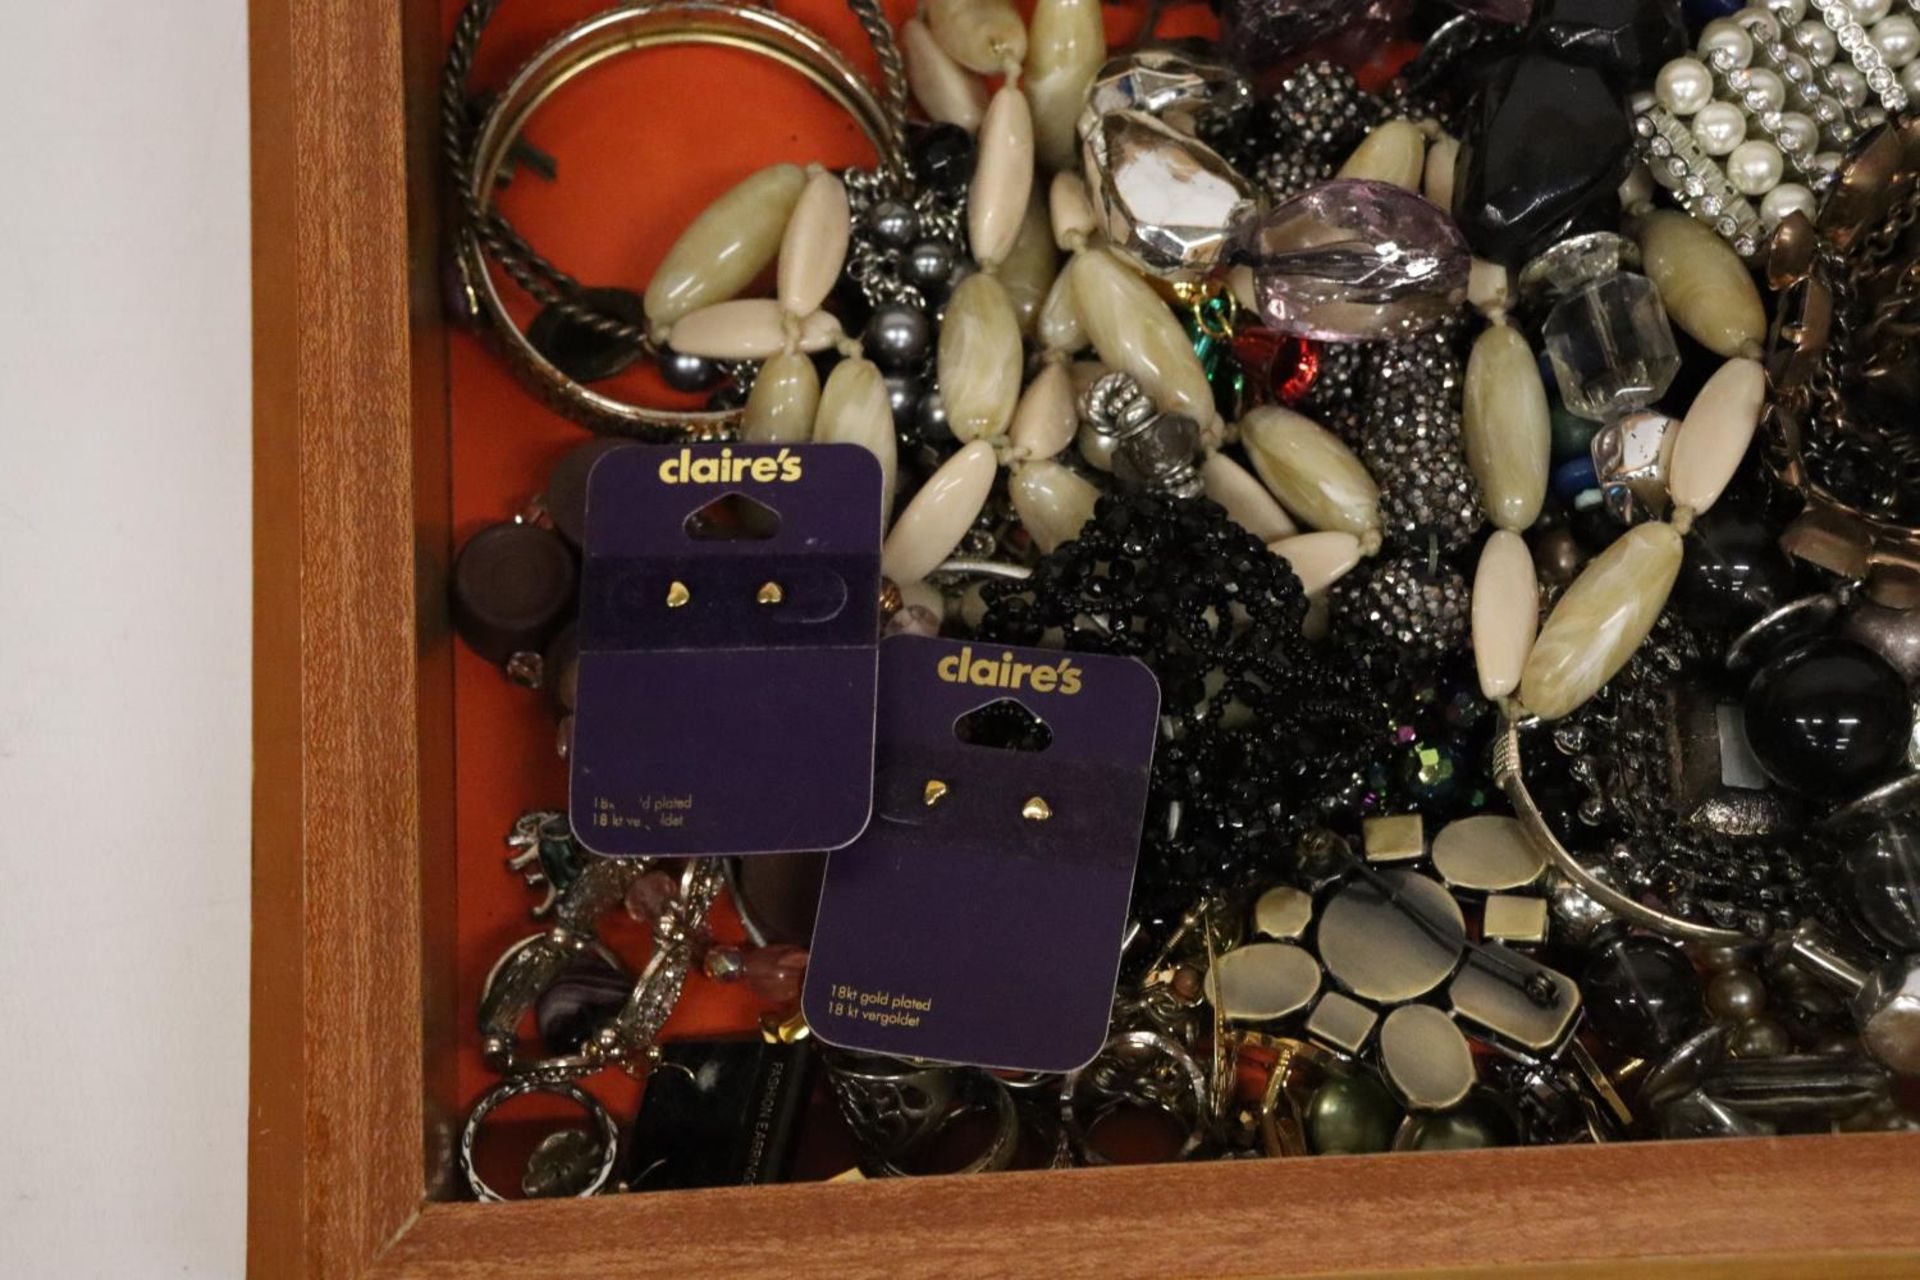 A QUANTITY OF COSTUME JEWELLERY IN A GLASS TOPPED DISPLAY CASE - Image 4 of 6